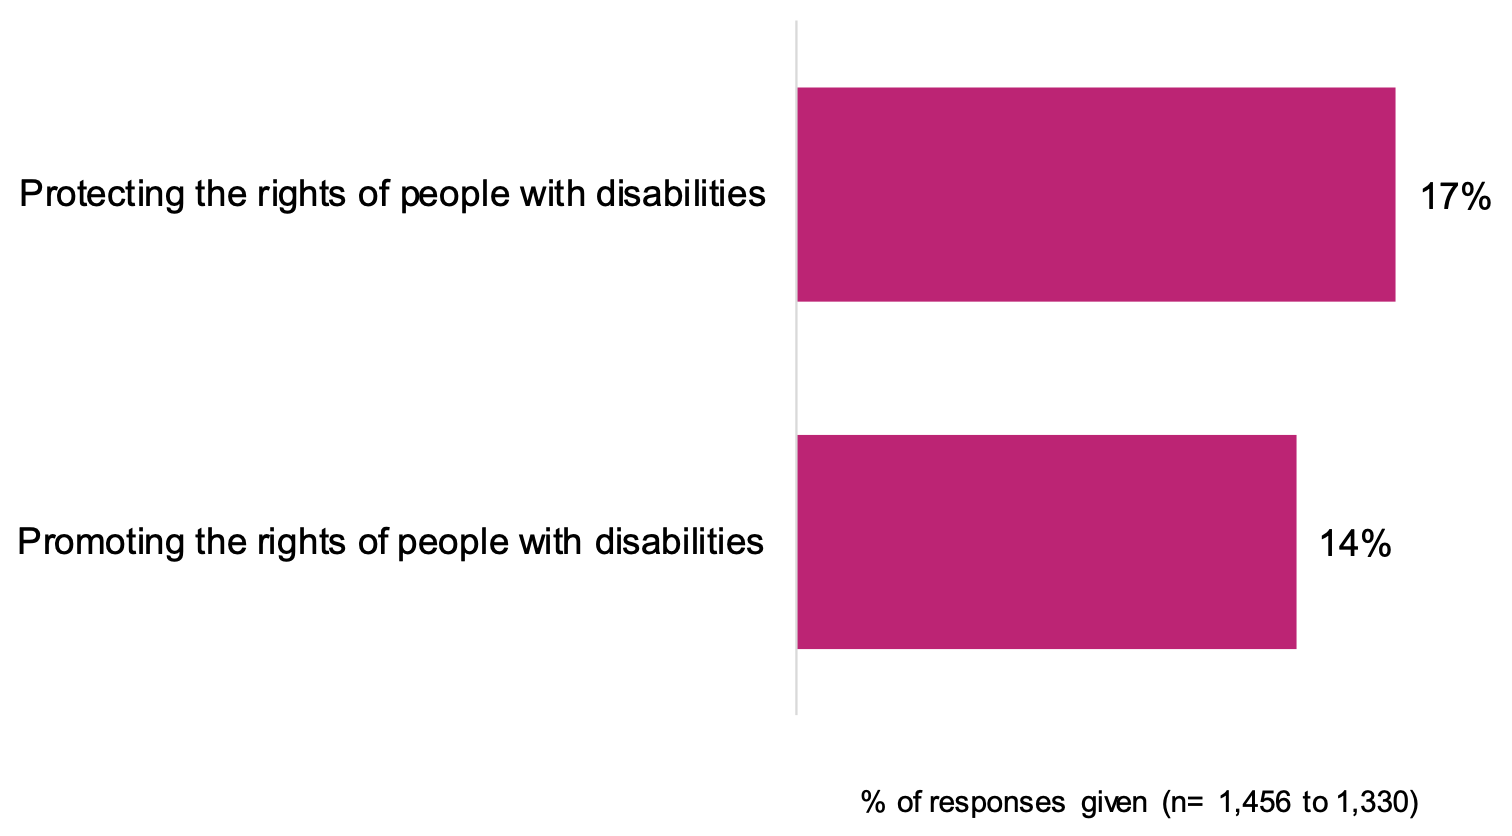 This is a bar chart of how participants feel Canada is doing in protecting and promoting the rights of people with disabilities.